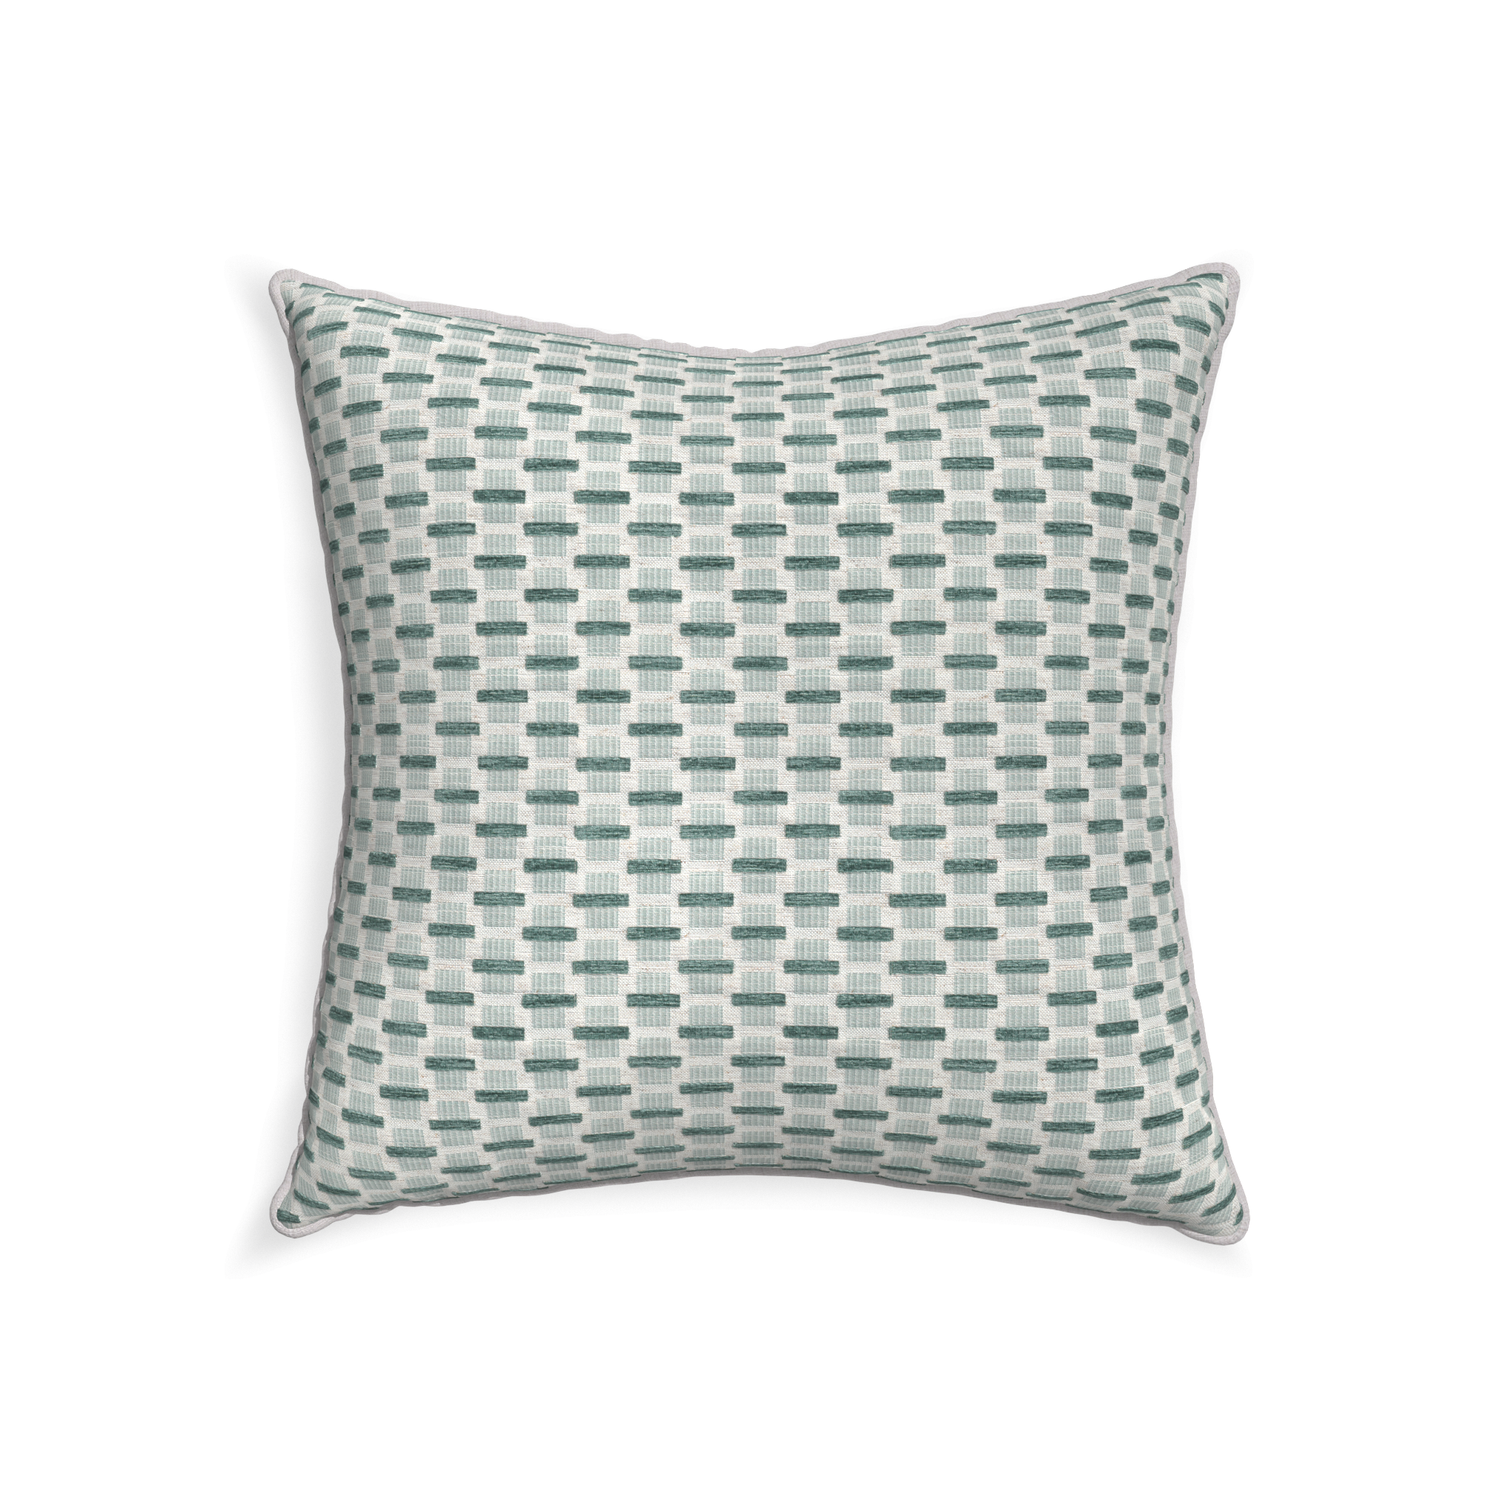 22-square willow mint custom green geometric chenillepillow with pebble piping on white background